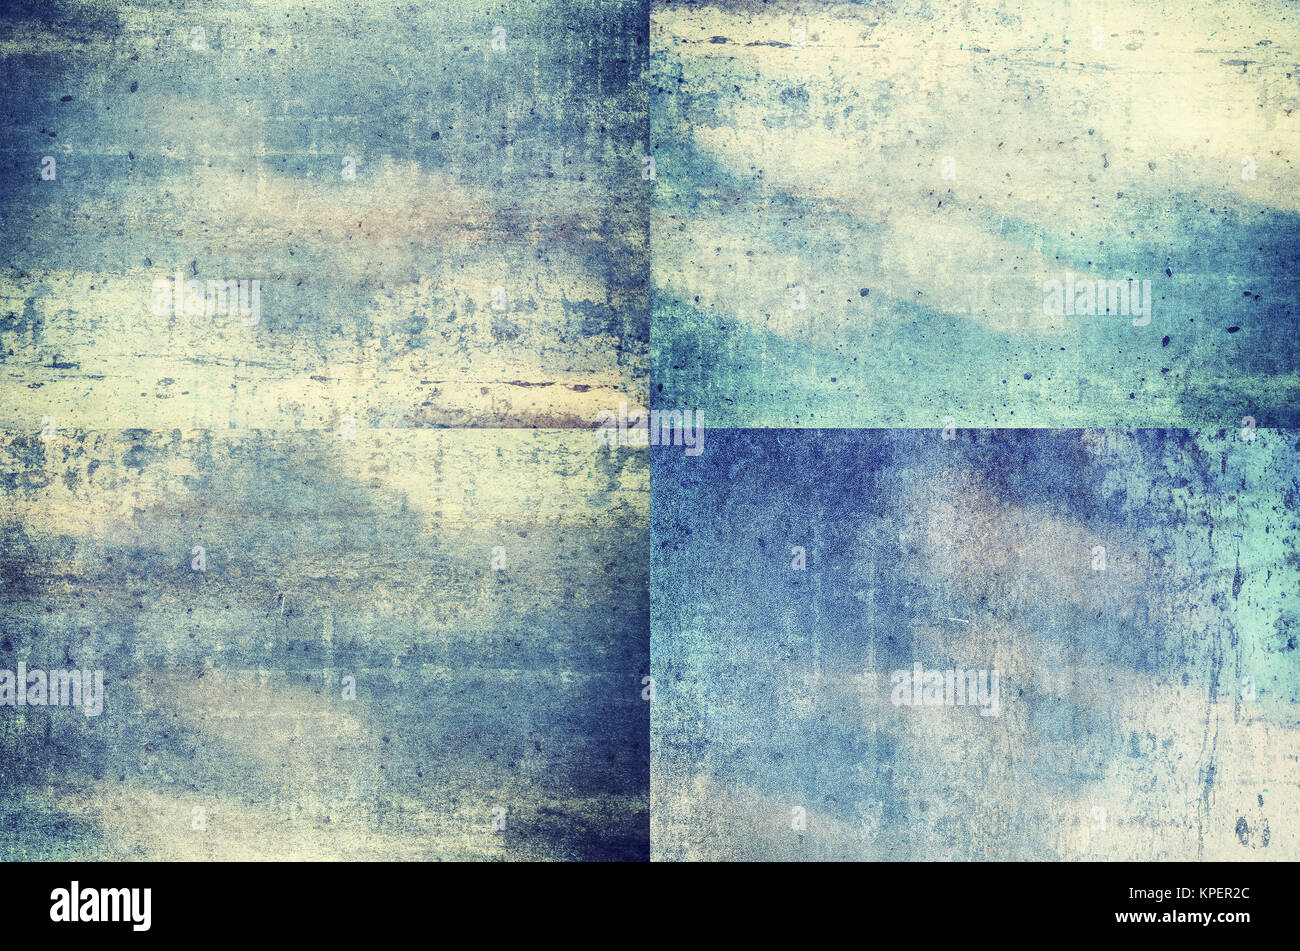 Blue colored grunge texture backgrounds Stock Photo